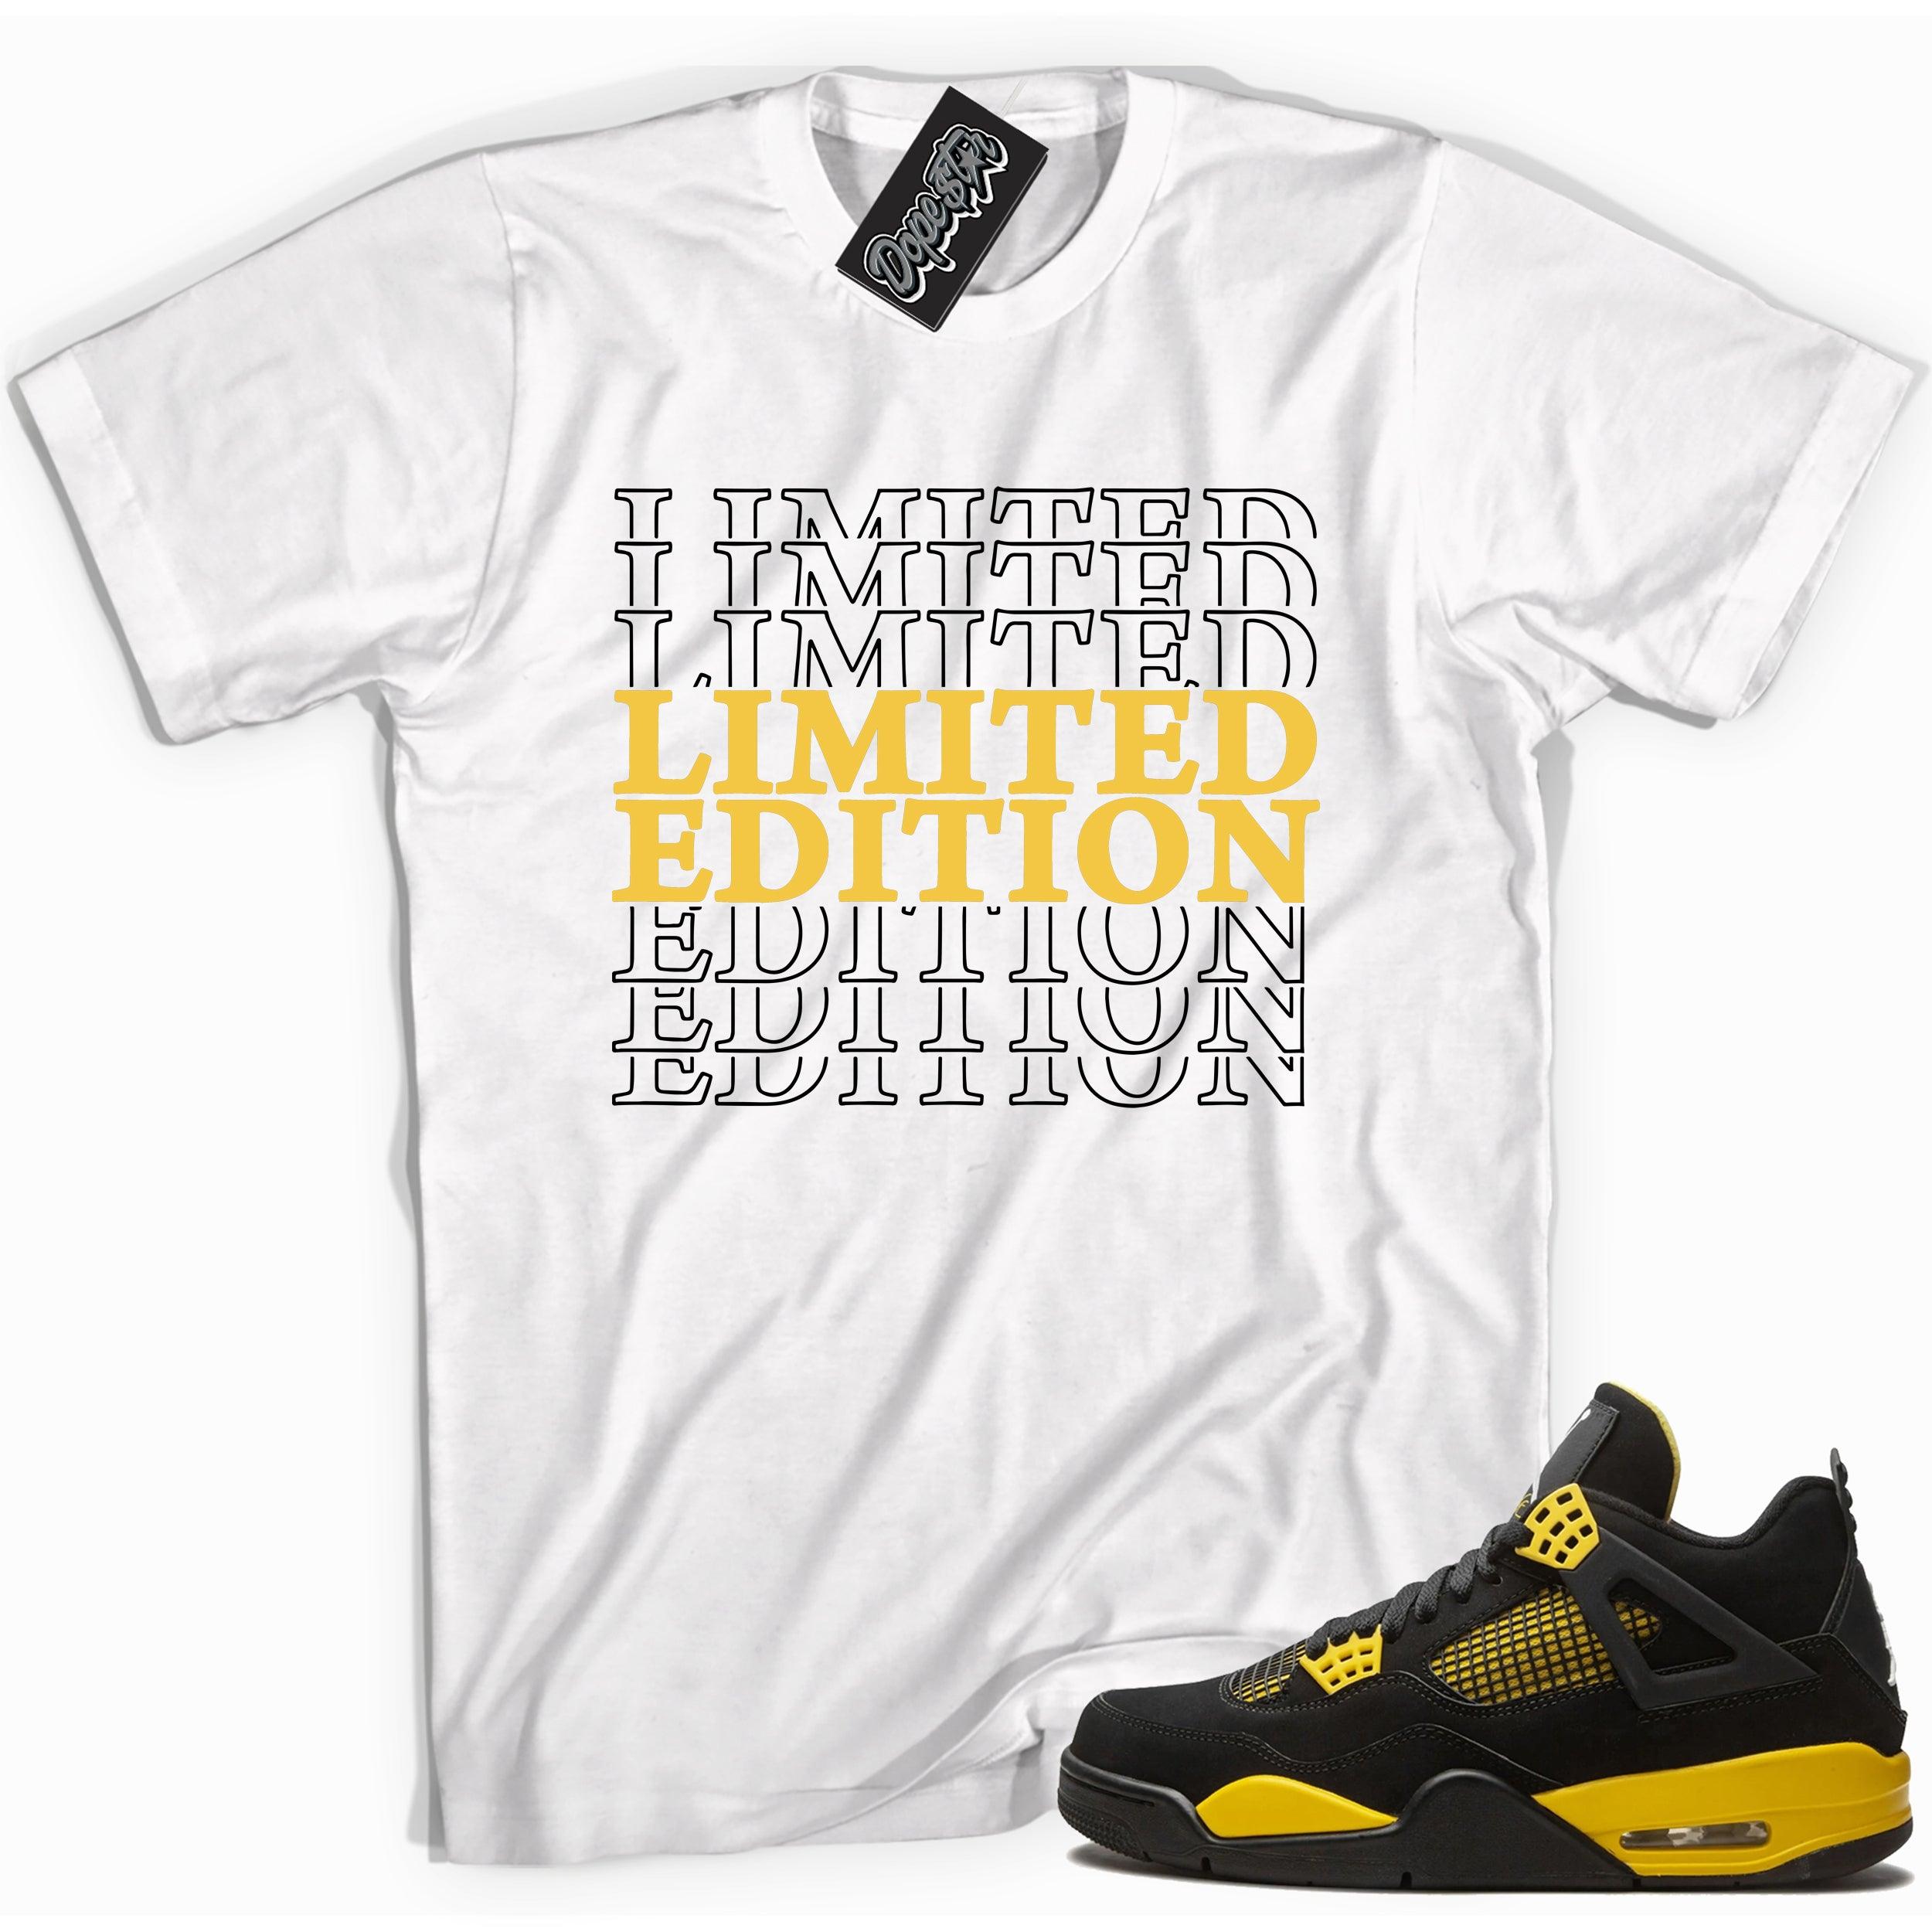 Cool white graphic tee with 'limited edition' print, that perfectly matches Air Jordan 4 Thunder sneakers